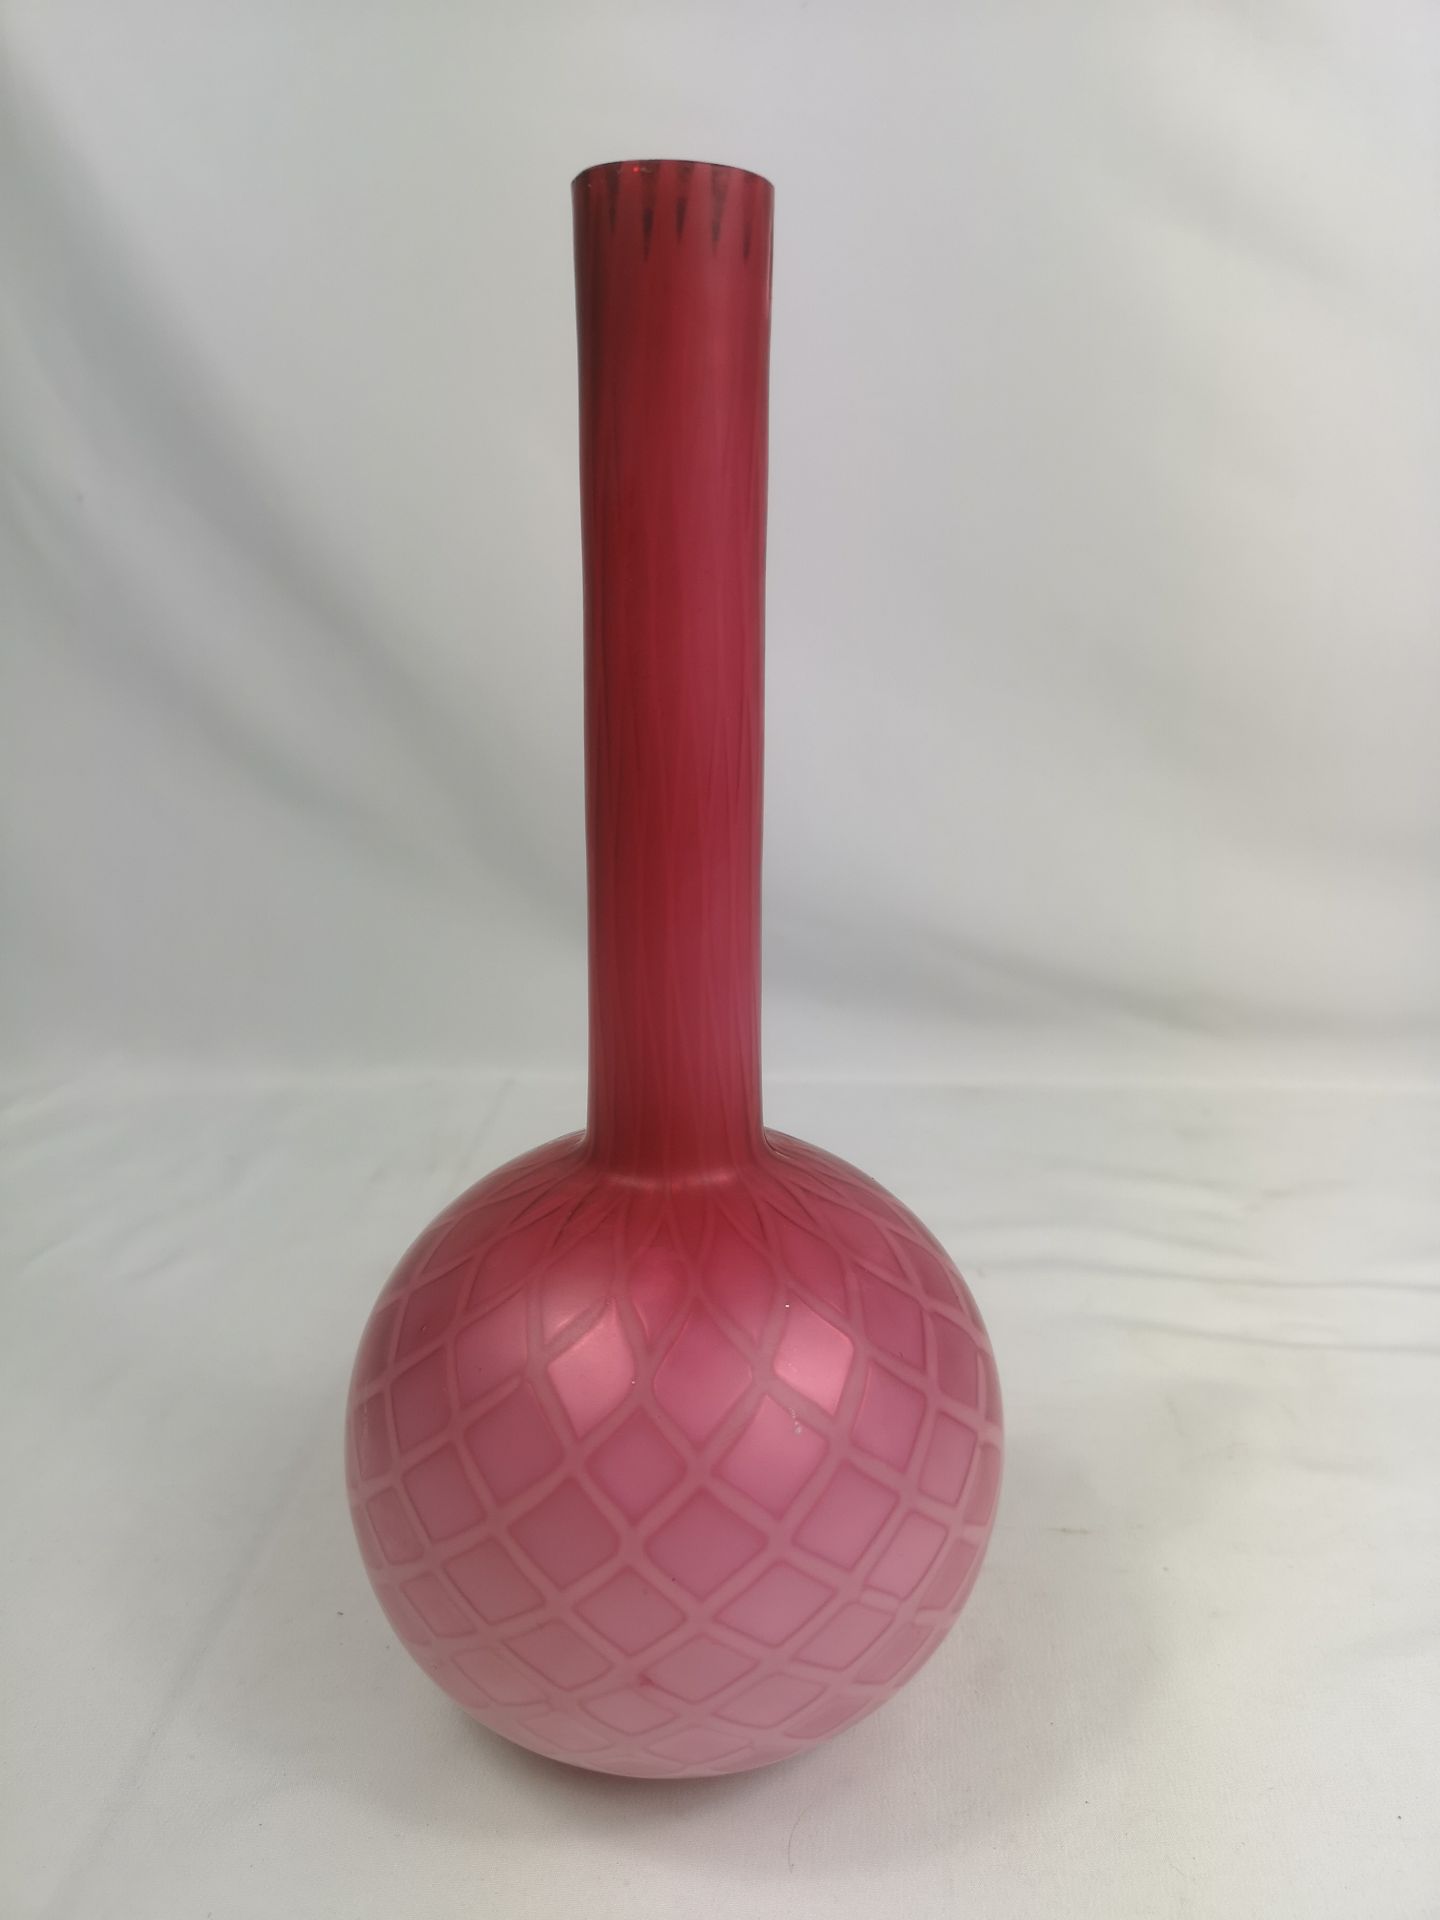 Layered cranberry over opalescent glass vase